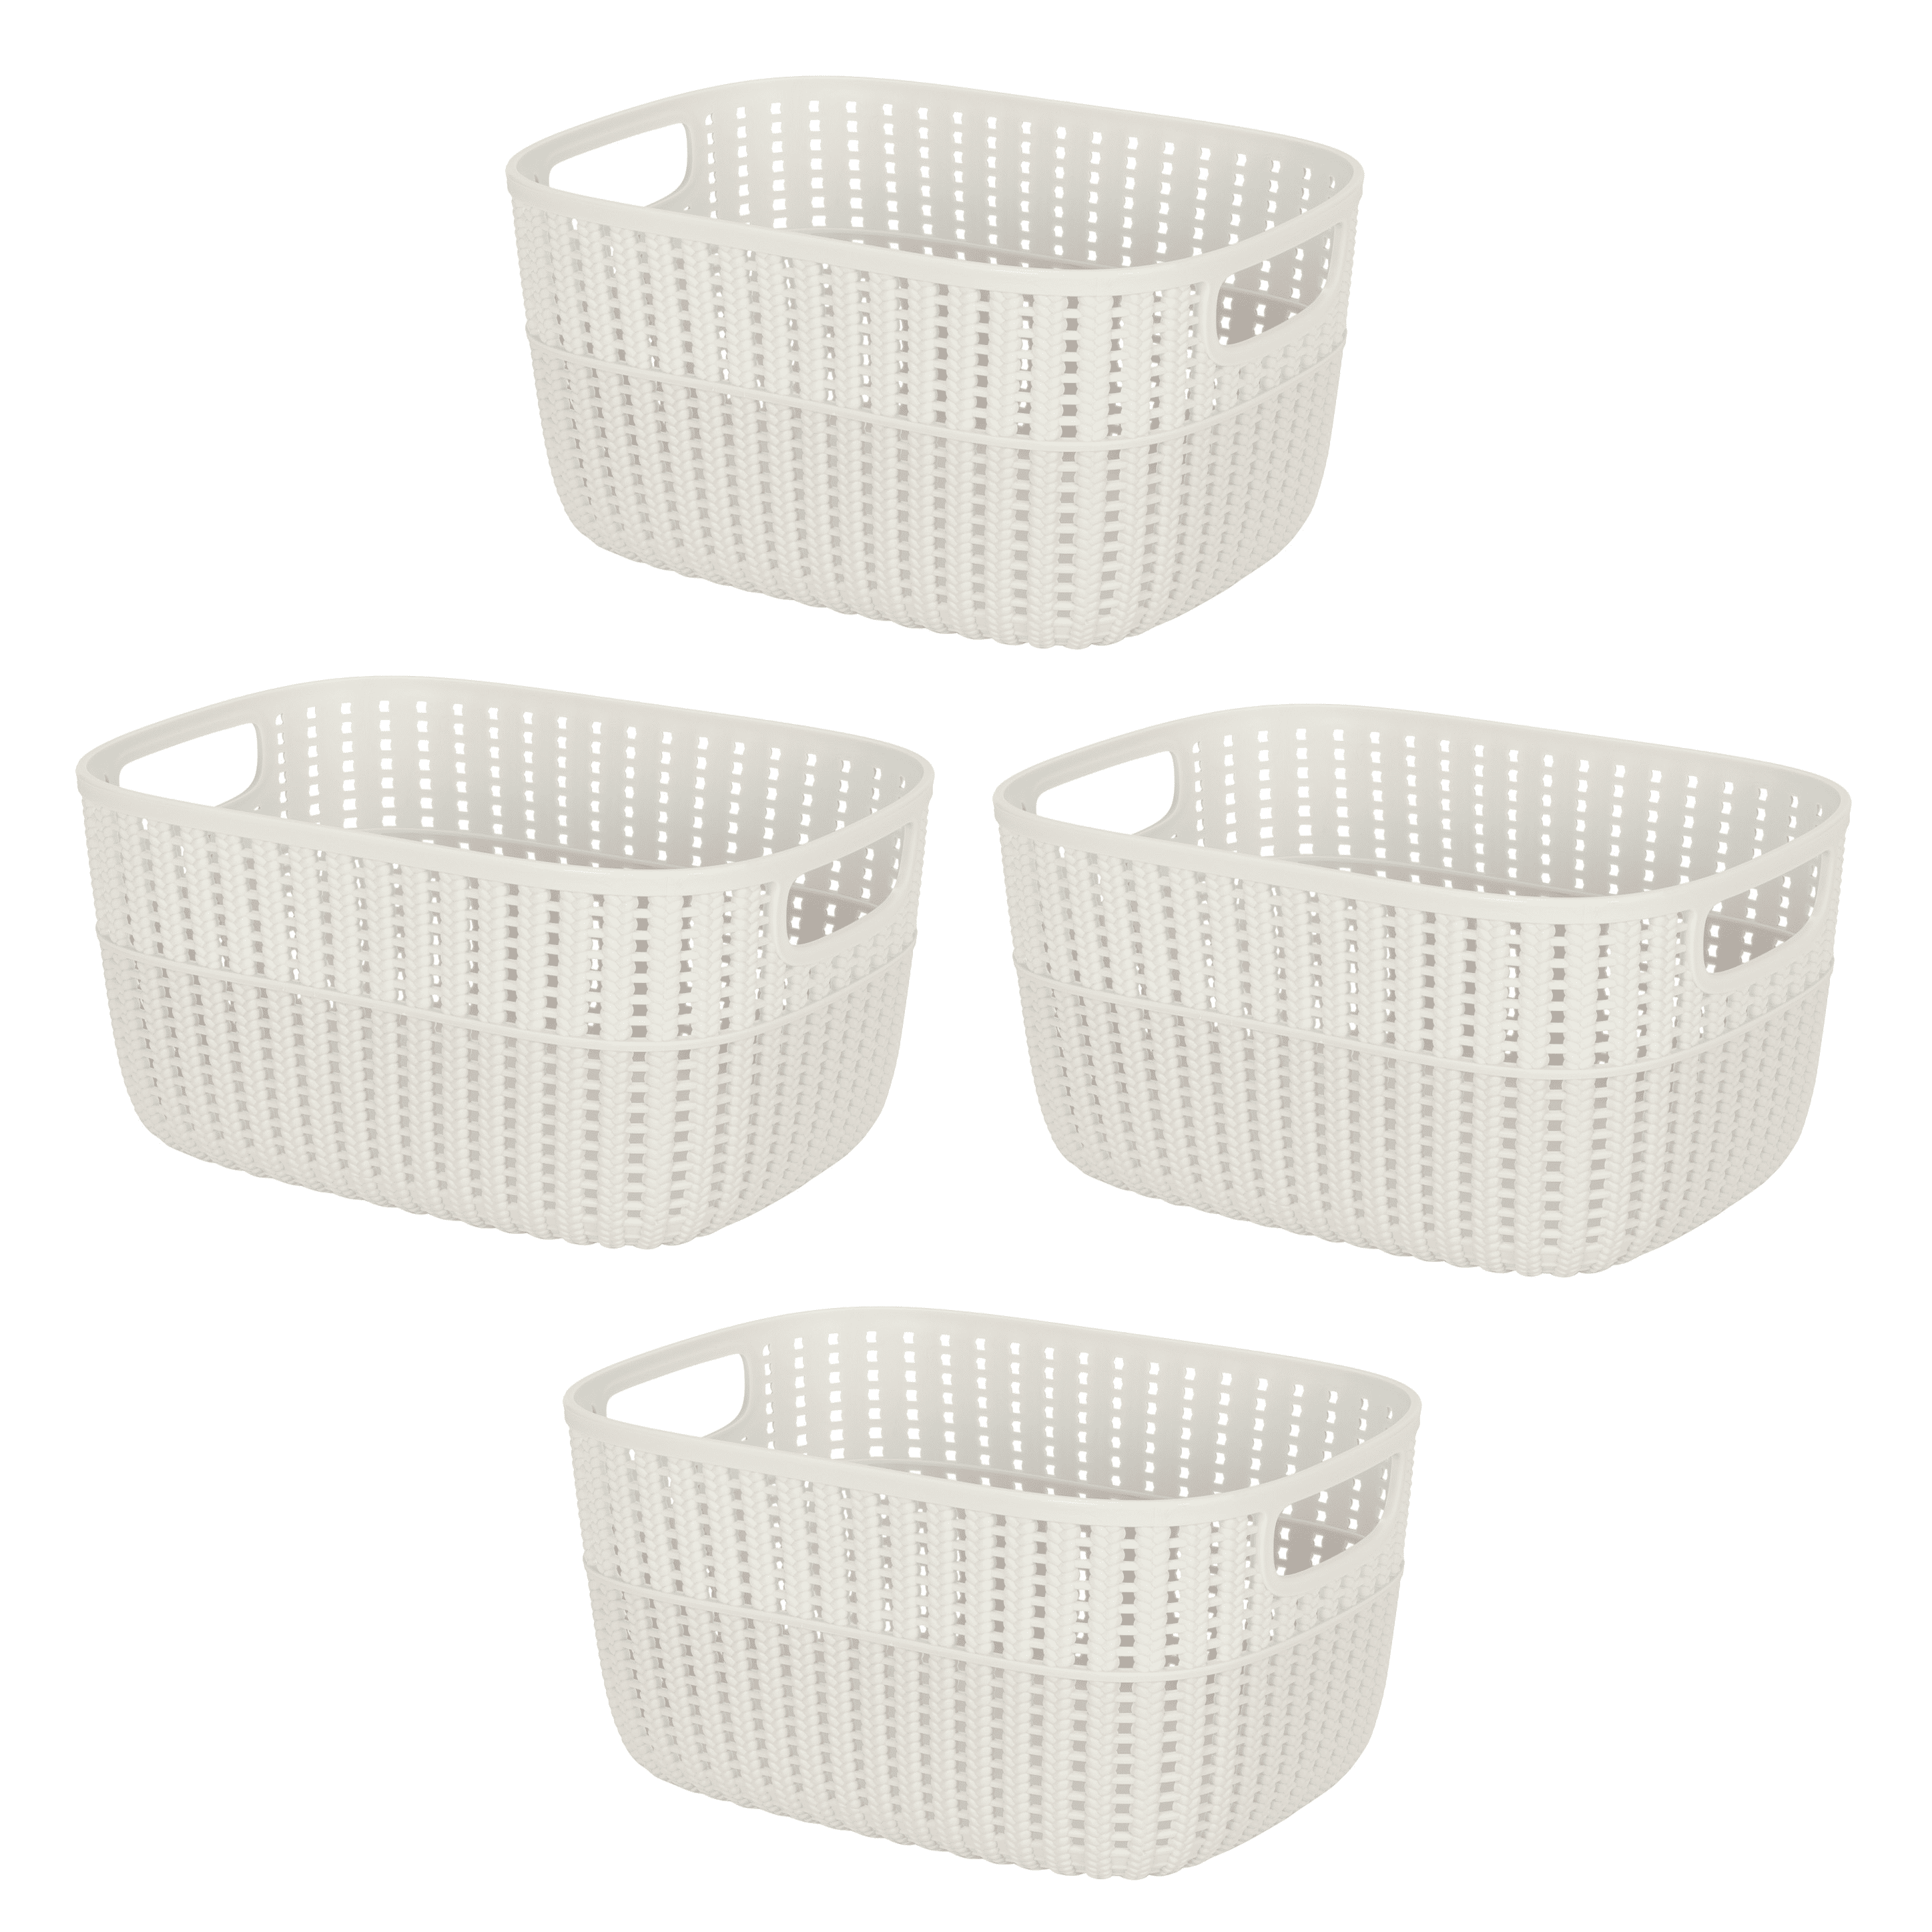 21 Beautiful Storage Baskets For Decluttering Your Home – The